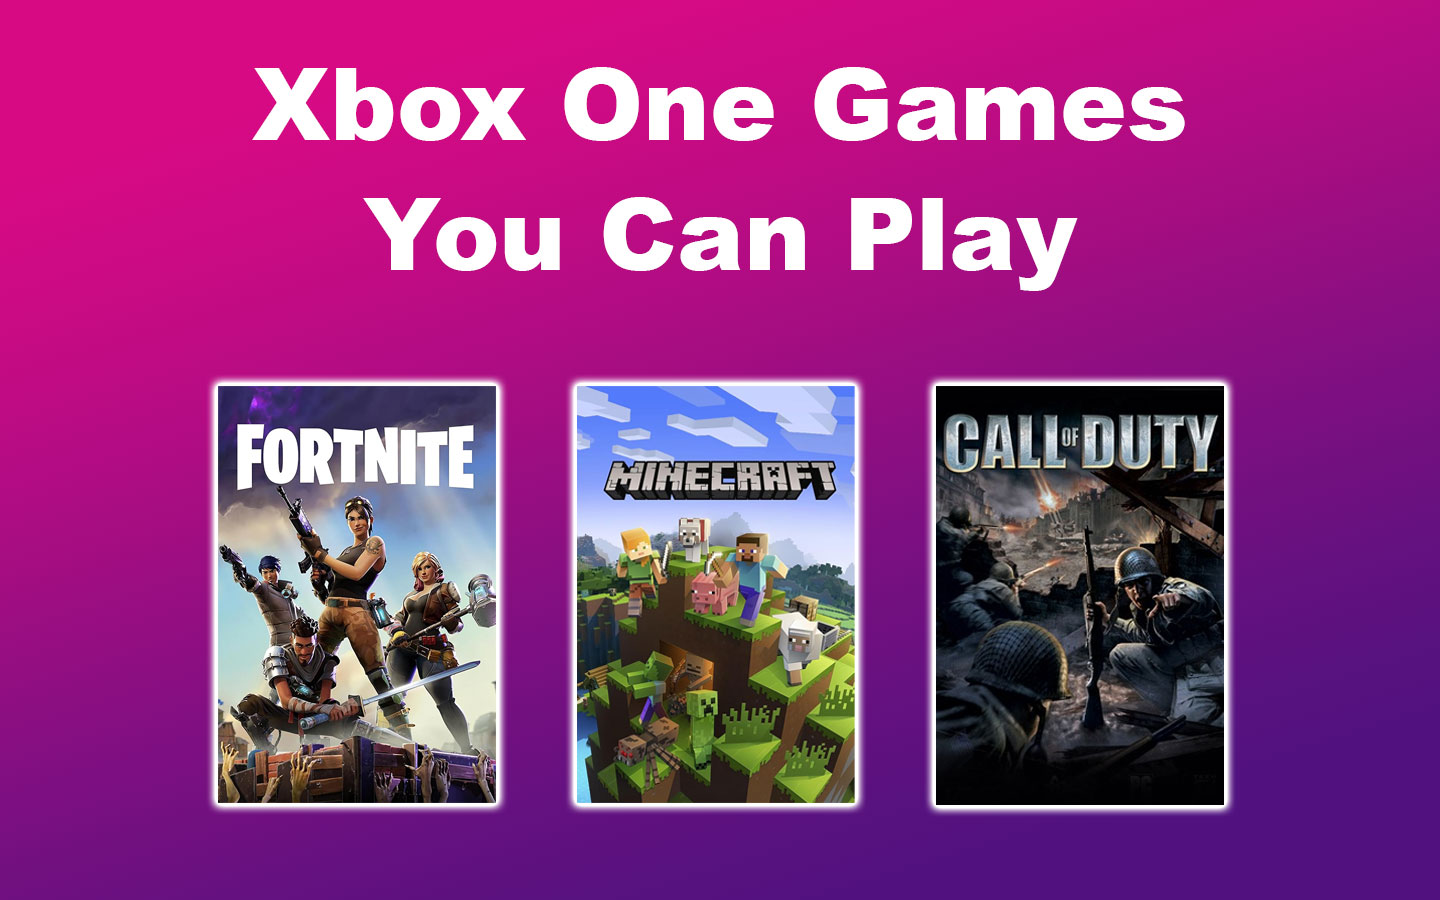 Xbox One Games You Can Play